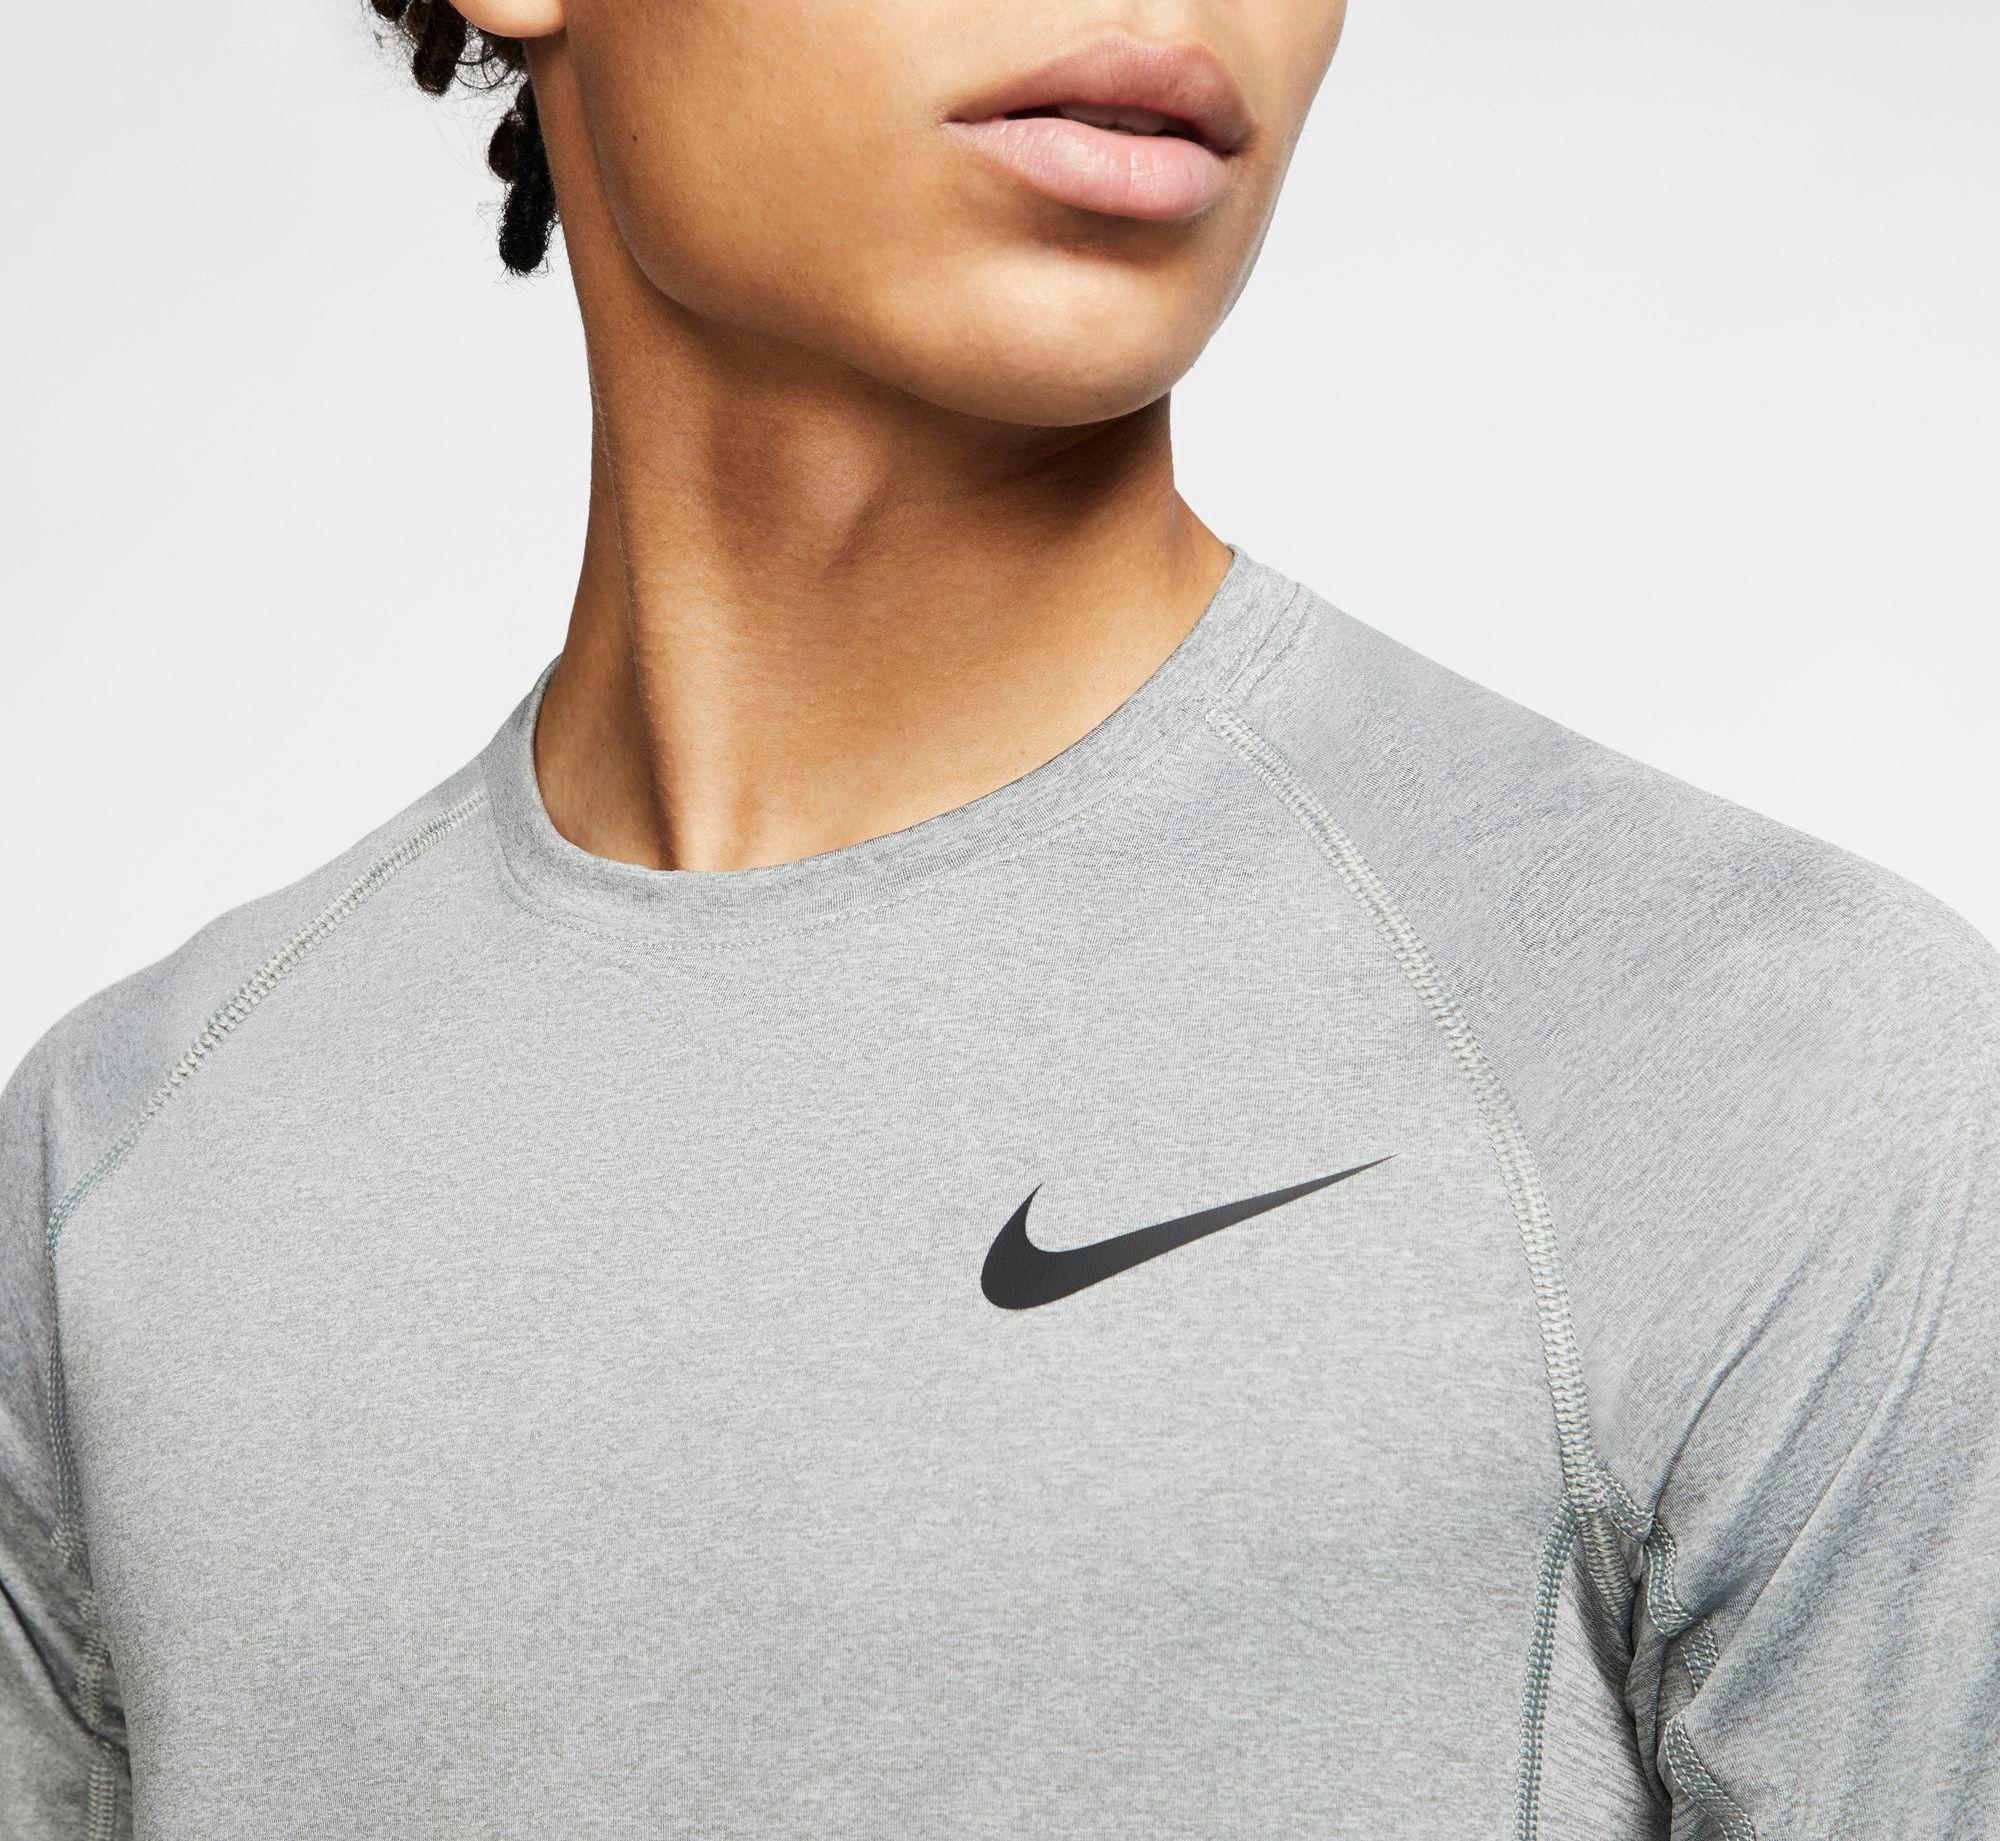 Nike Pro Slim T-shirt (regular And Big & Tall) in Blue for Men - Lyst